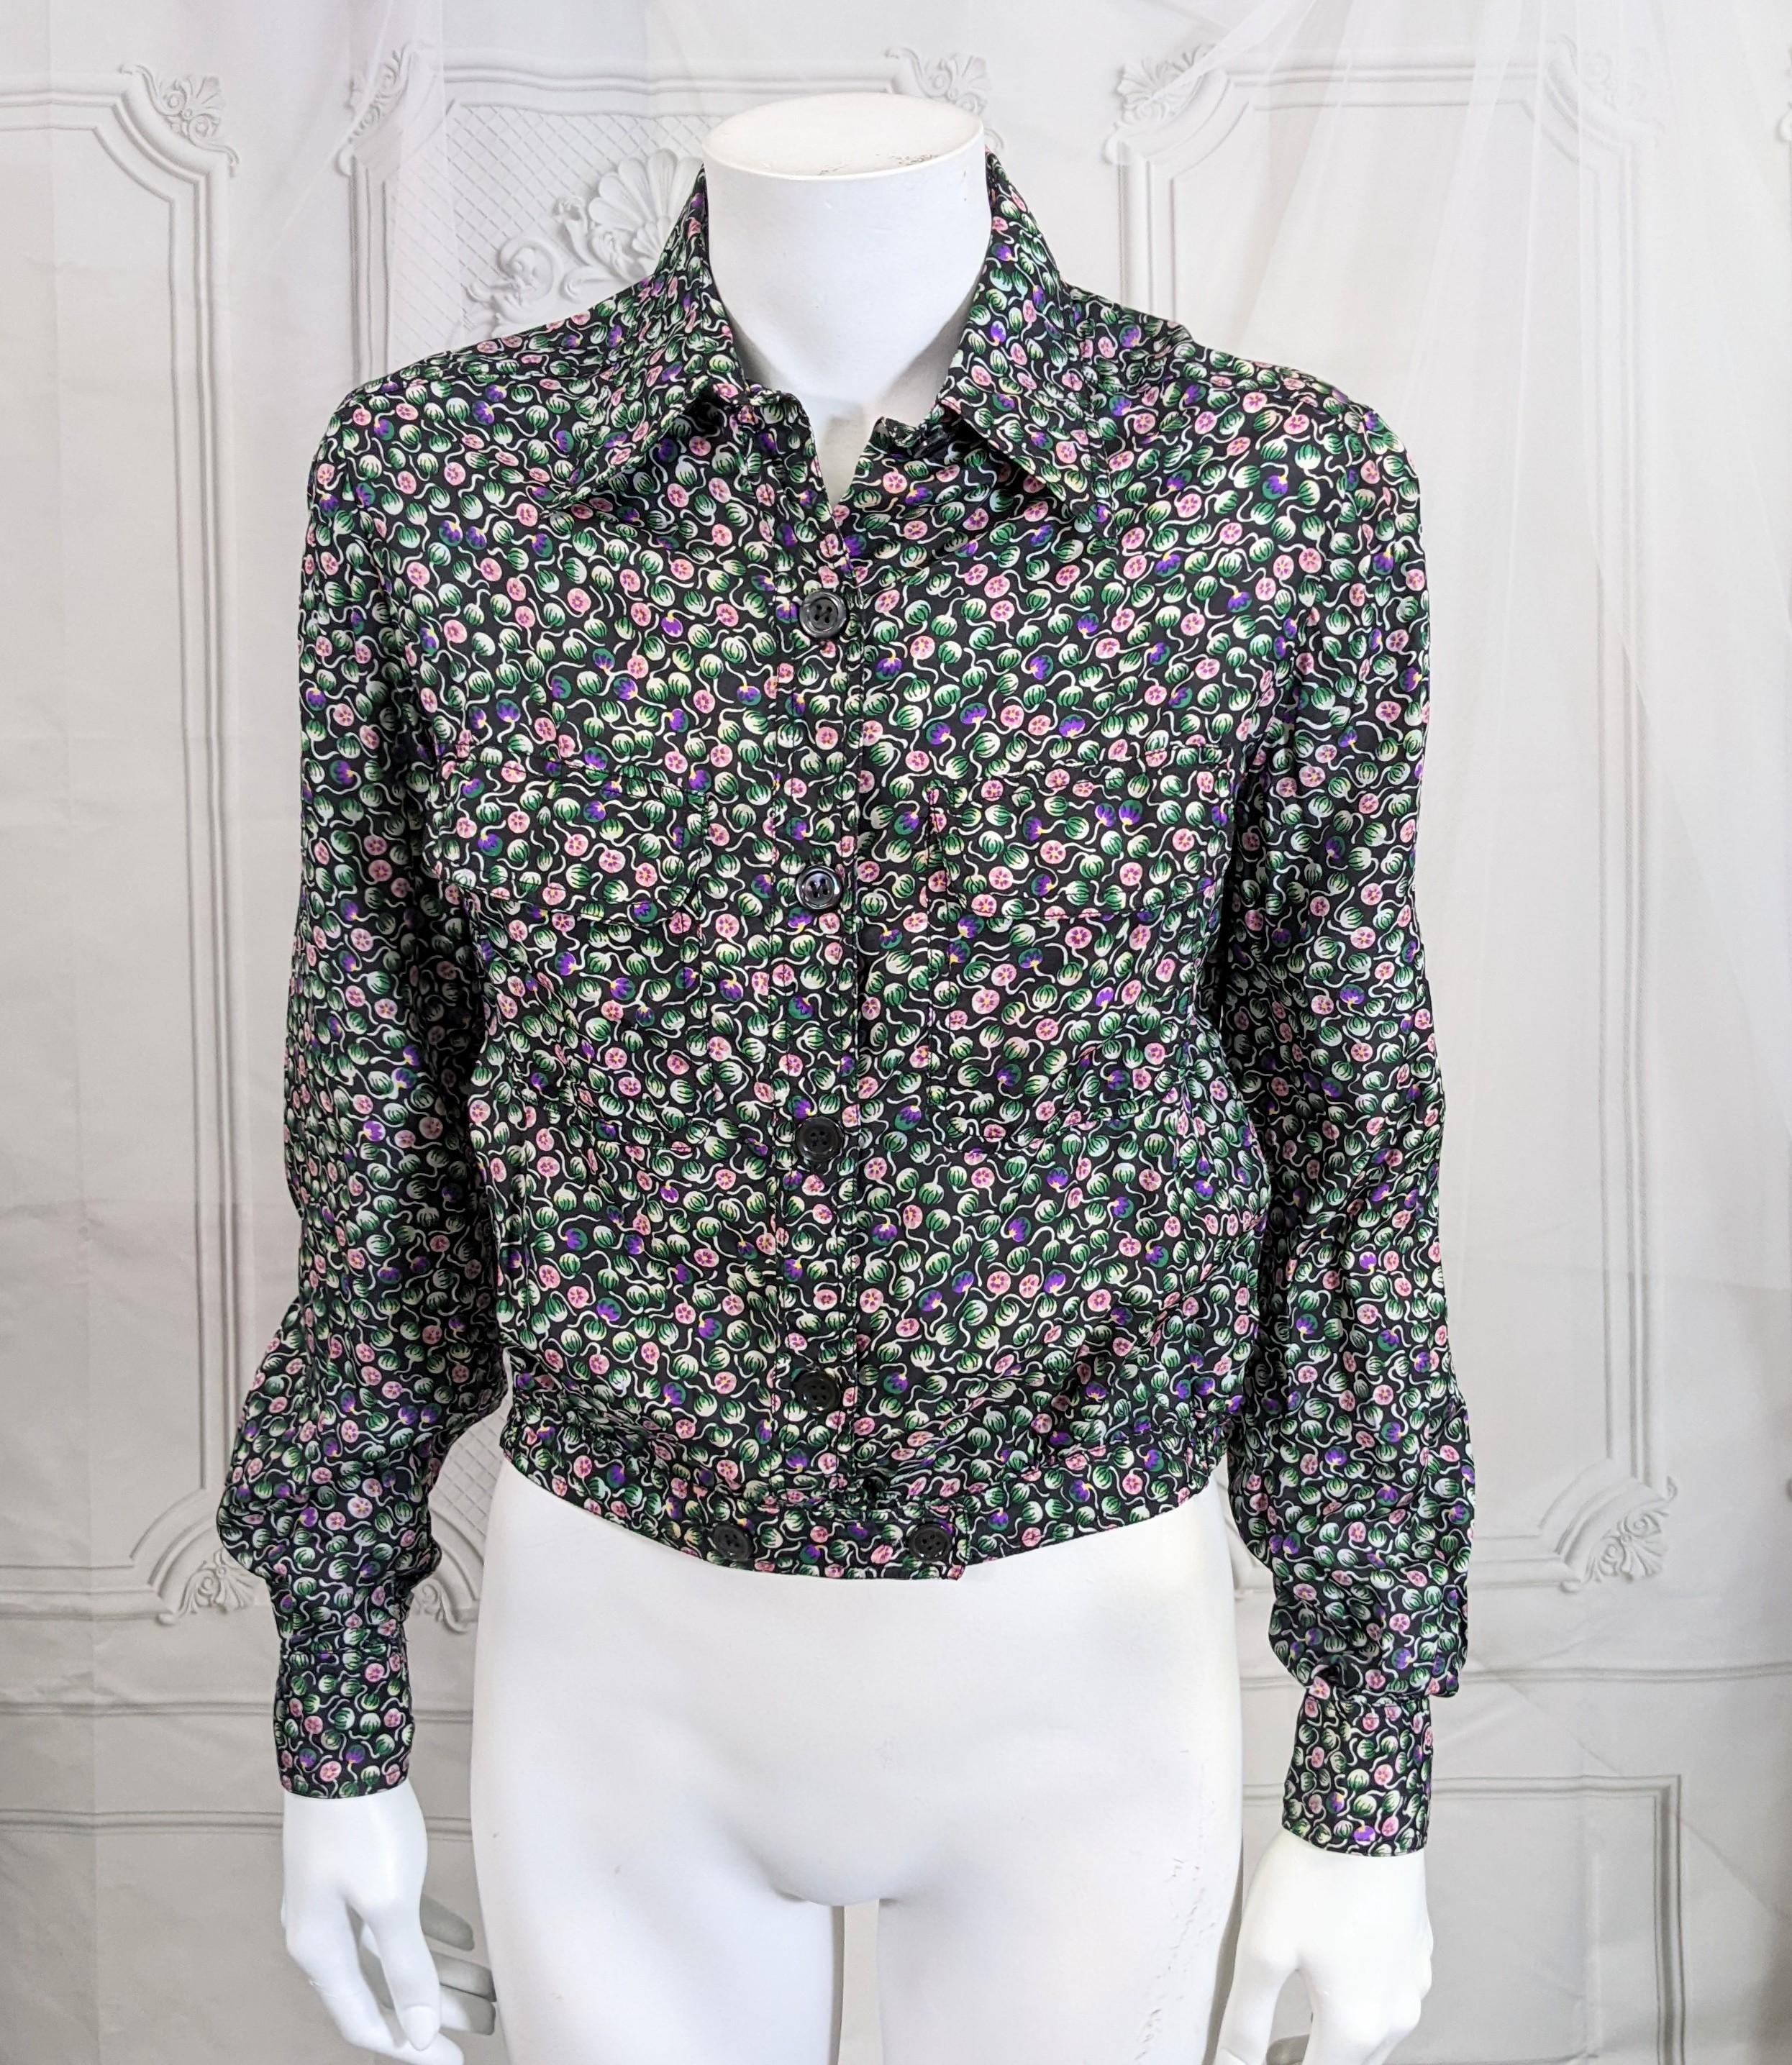 Franck Olivier Floral Print Bomber Blouse from the 1970's.  A lovely Liberty style floral silk shirting is used in a cool bomber jacket style but is actually a blouse. 2 button pockets with double button waistband. 
1970's France.  Marked size 40